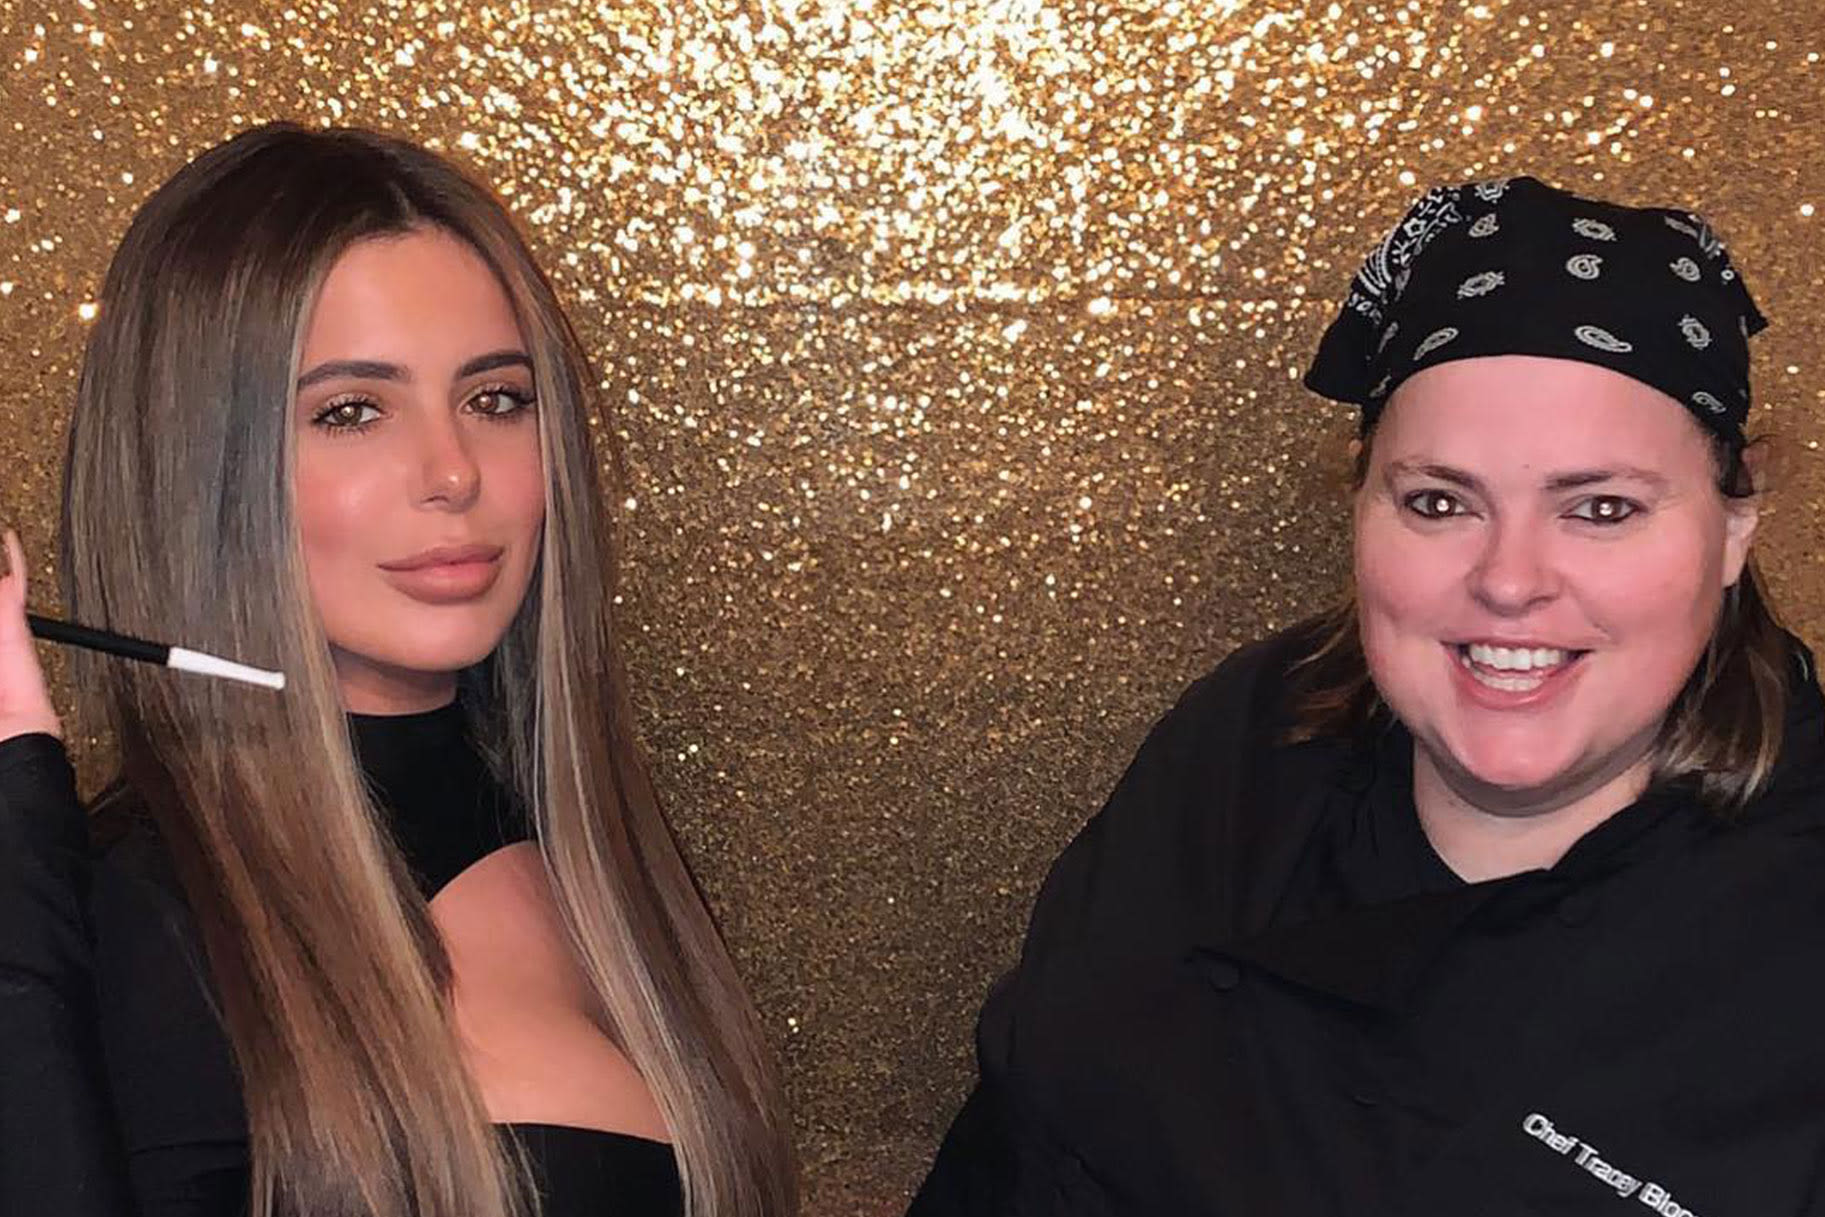 Brielle Biermann Is Following in Chef Tracey Bloom's Footsteps: "Stay Tuned"